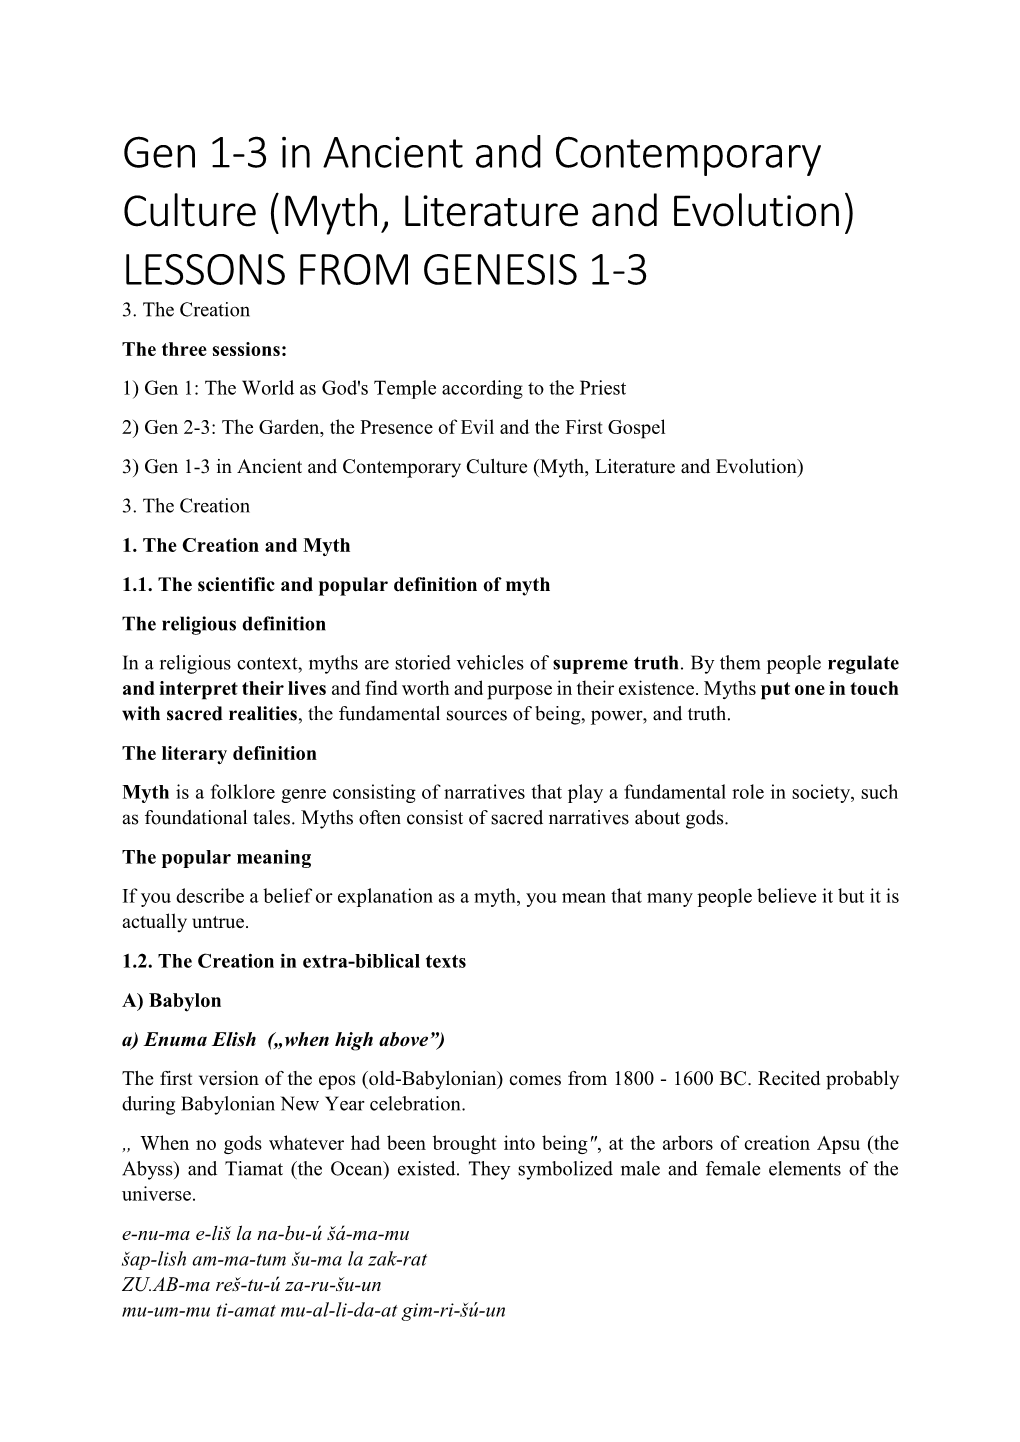 Myth, Literature and Evolution) LESSONS from GENESIS 1-3 3